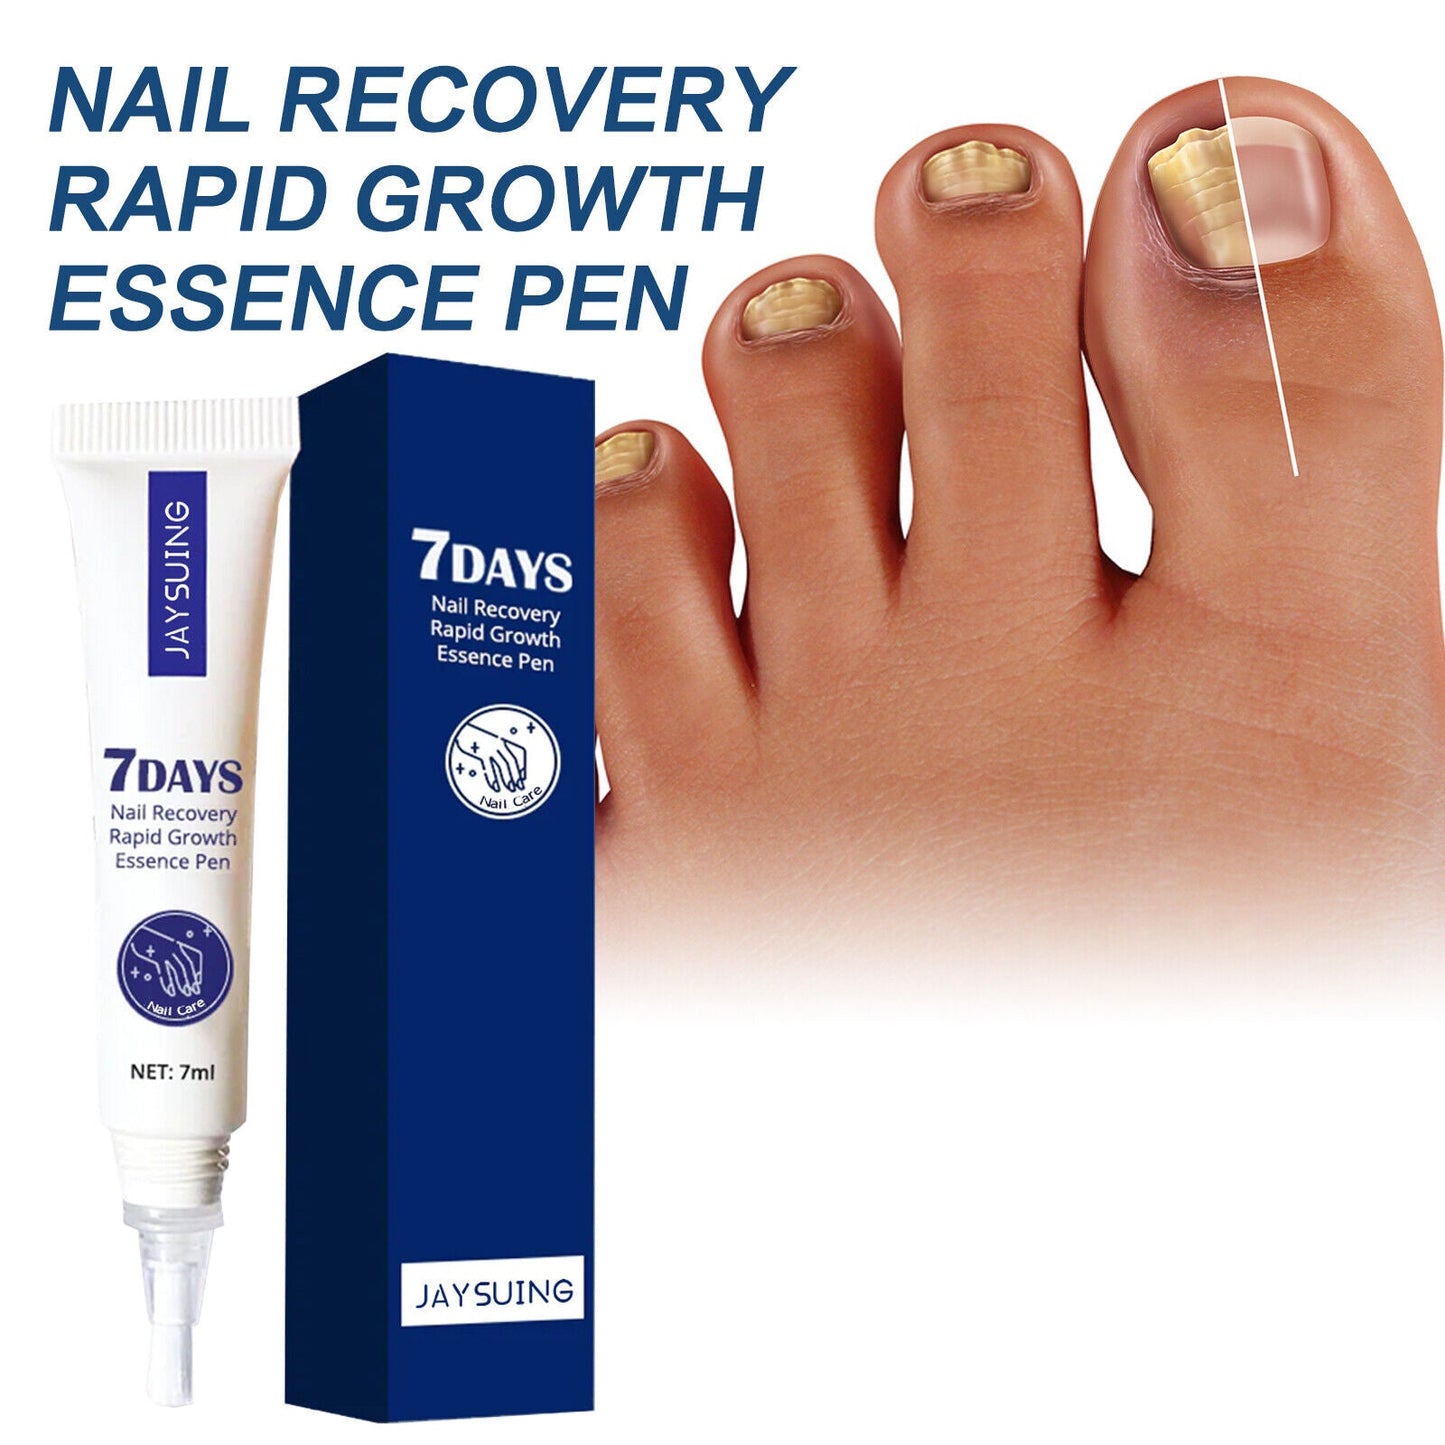 7 Days Nail Recovery Pen